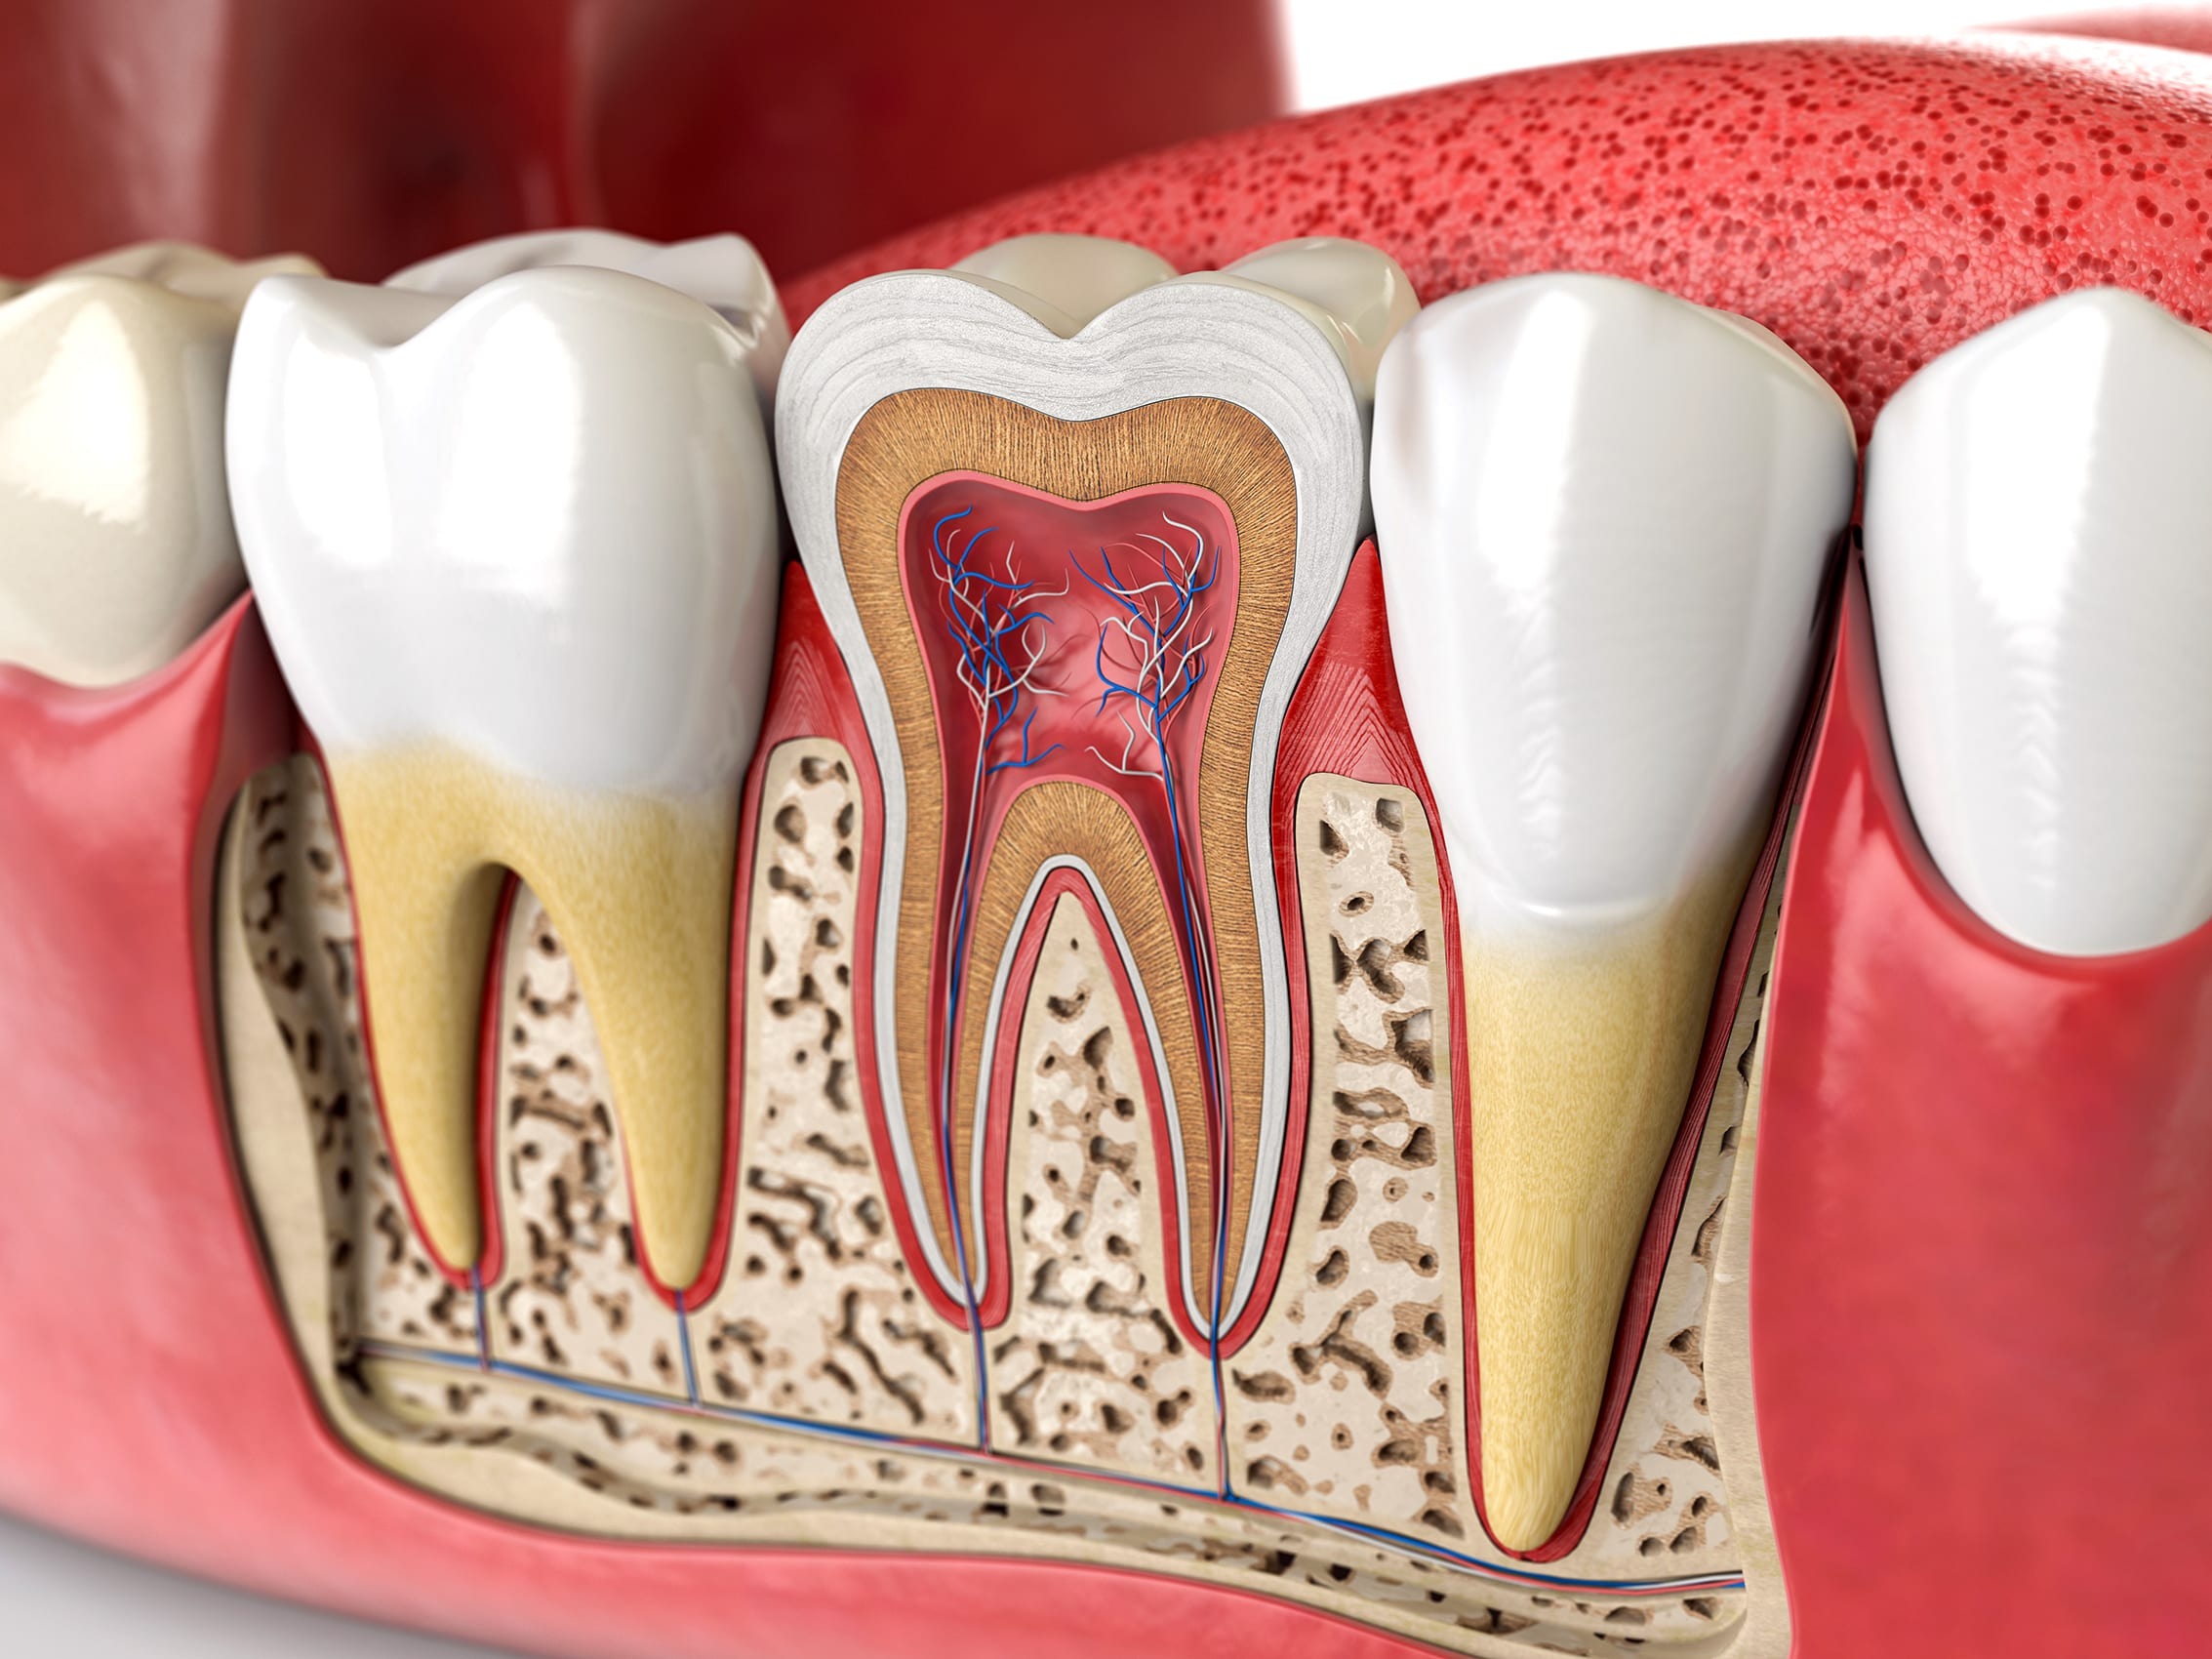 Steps of Root Canal Treatment